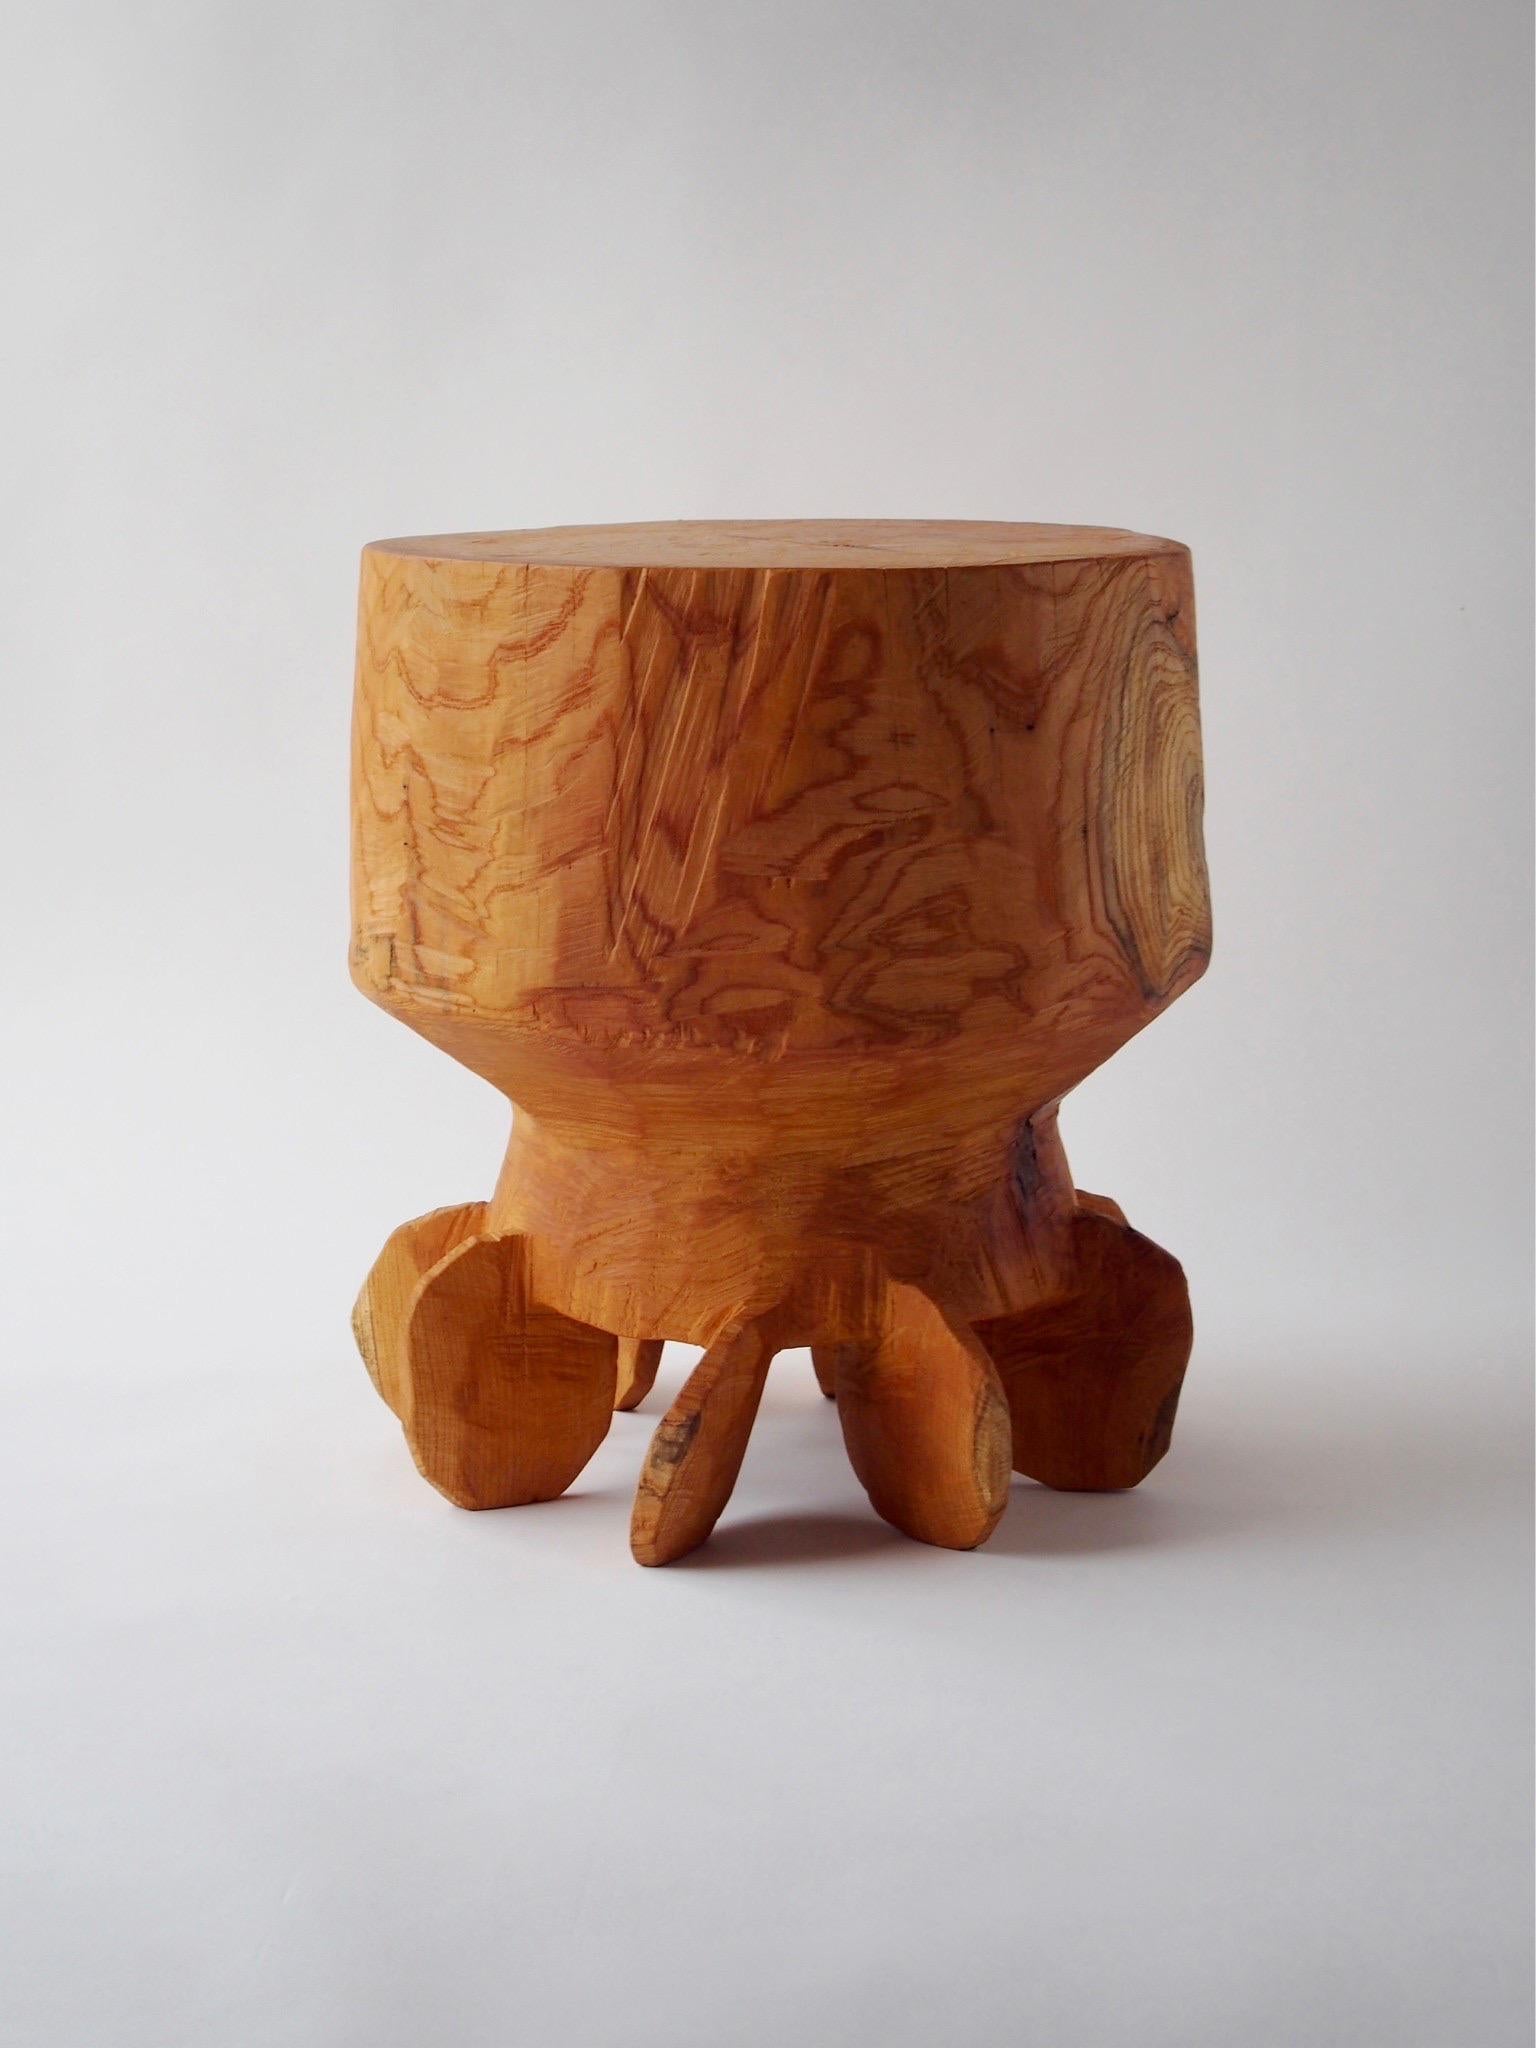 Name: 8x8
Sculptural table by Zougei carved furniture
Material: Zelkova
This work is carved from log with some kinds of chainsaws.
Most of wood used for Nishimura's works are unable to use anything, these woods are unsuitable material for furniture,